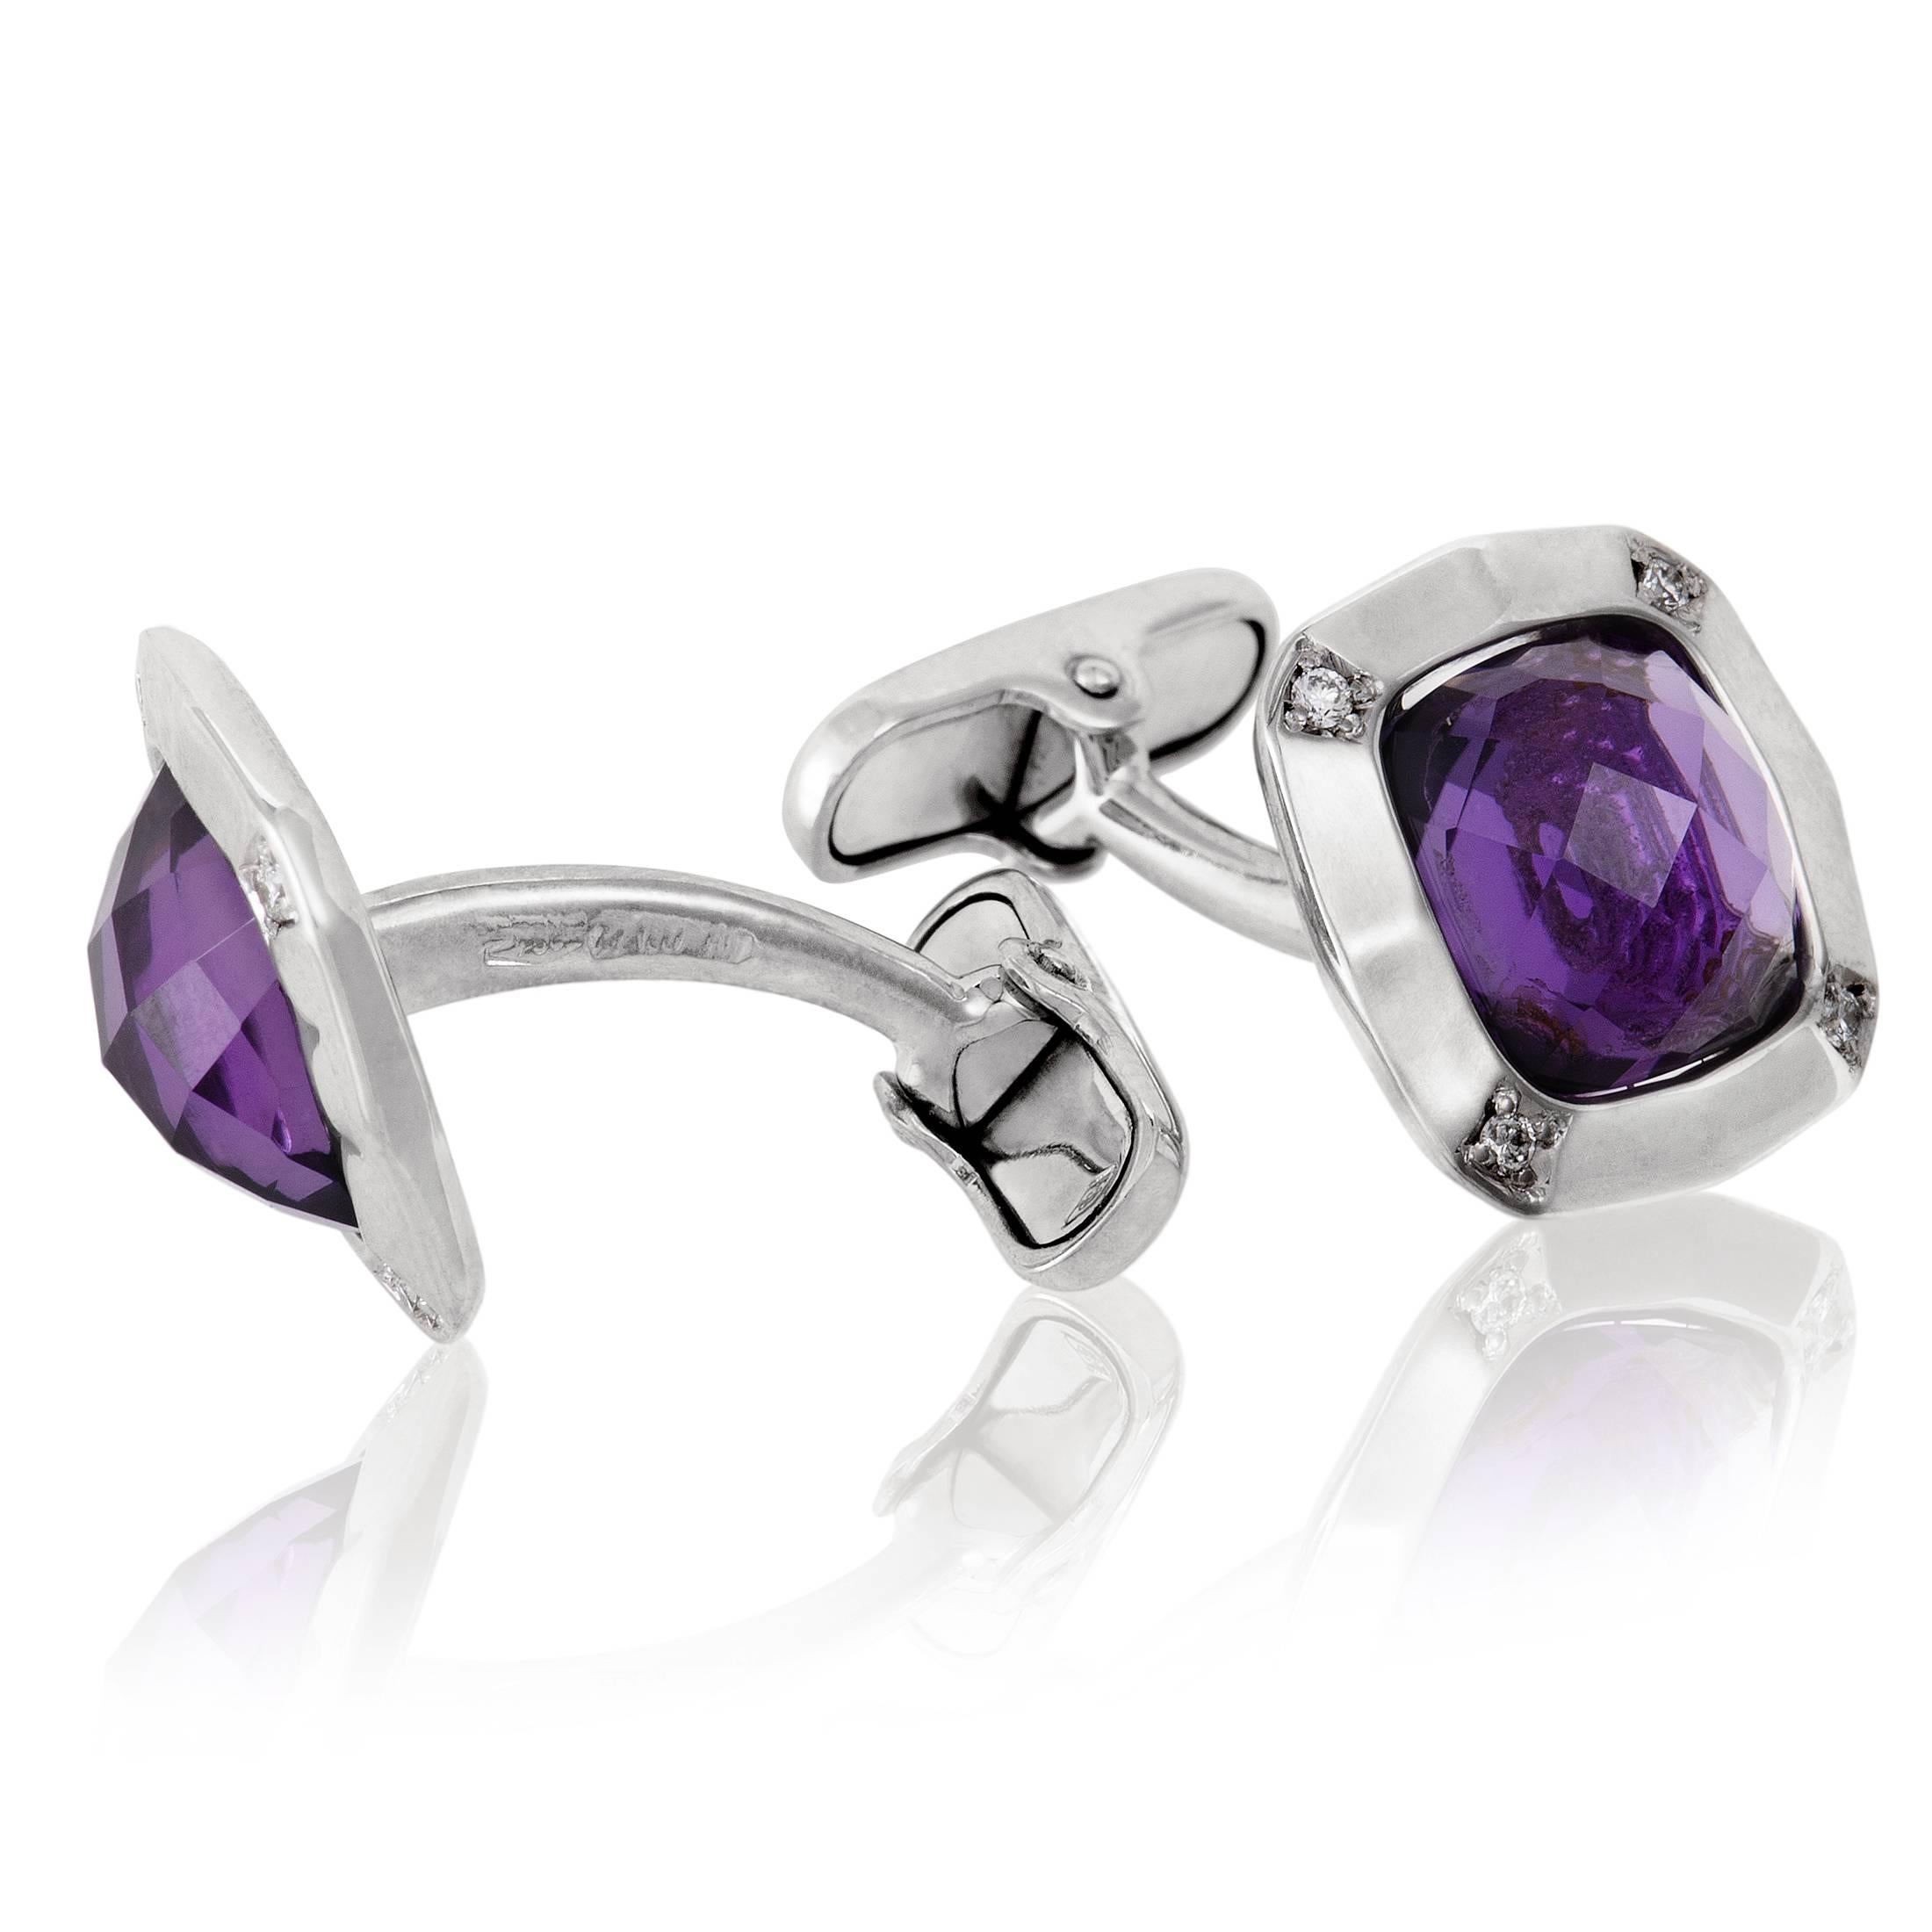 The magnificent color and exquisite cut of amethysts bring an appealing visual effect into these splendid 18K white gold cufflinks from Brioni which also boast 0.15ct of glistening diamonds for a final luxurious touch.